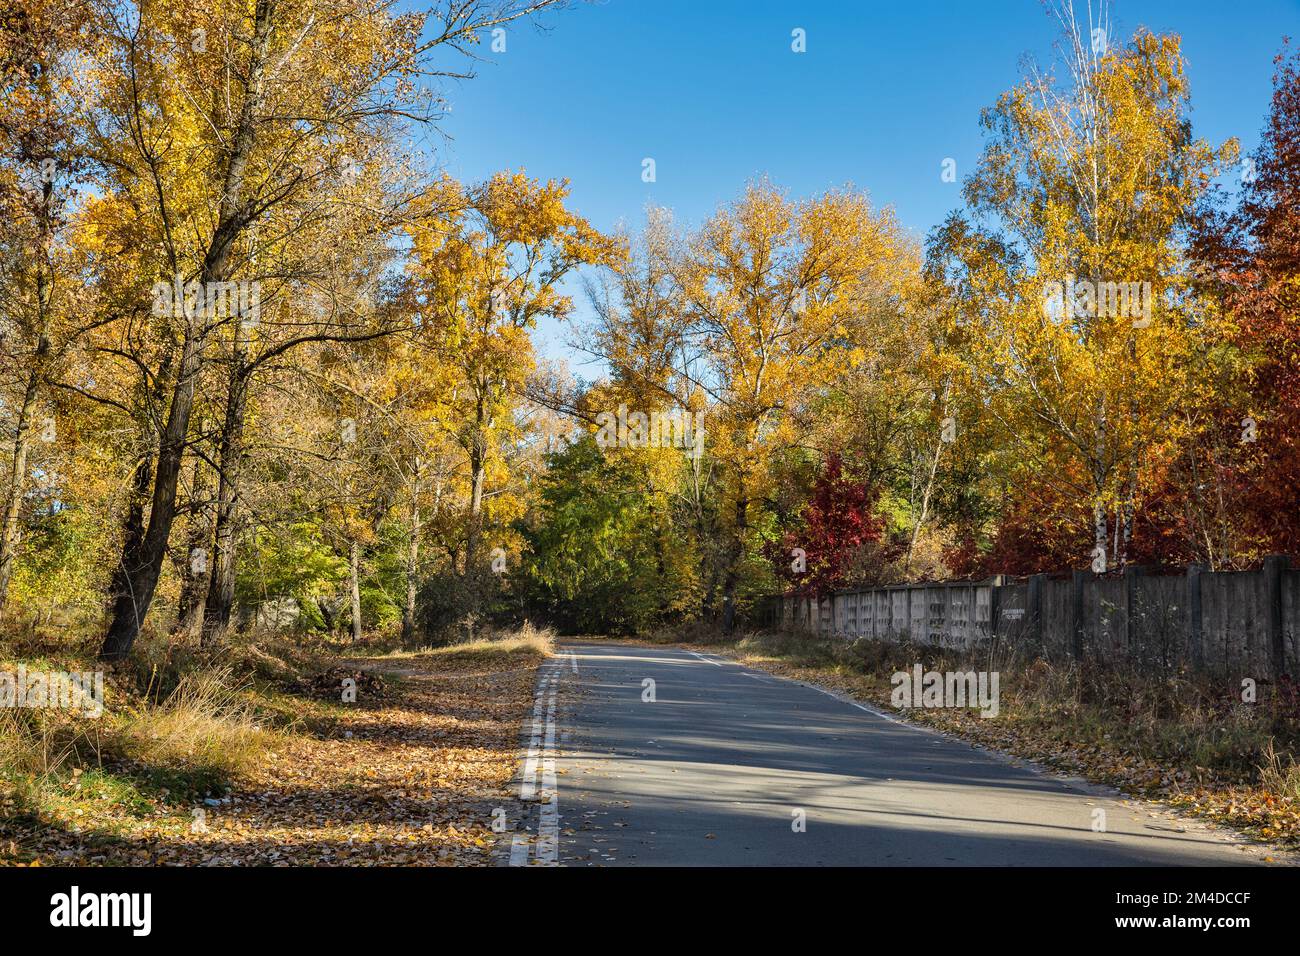 Landscape with empty asphalt road going into the autumn forest Stock Photo